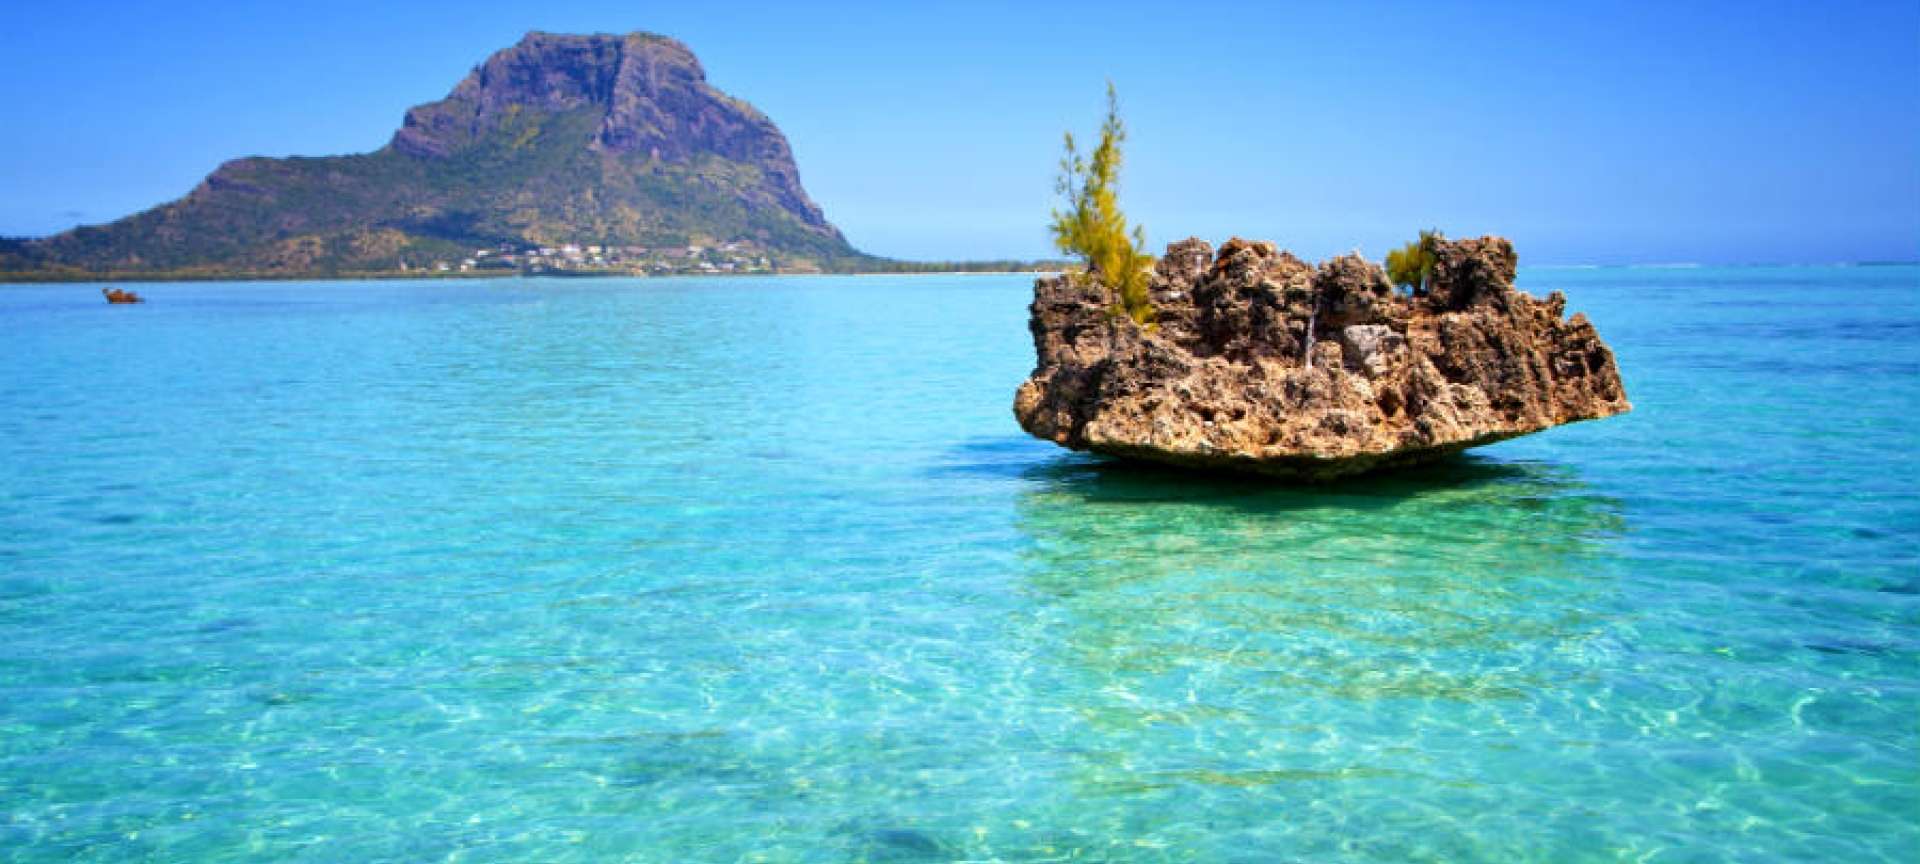 Why Go to Mauritius?